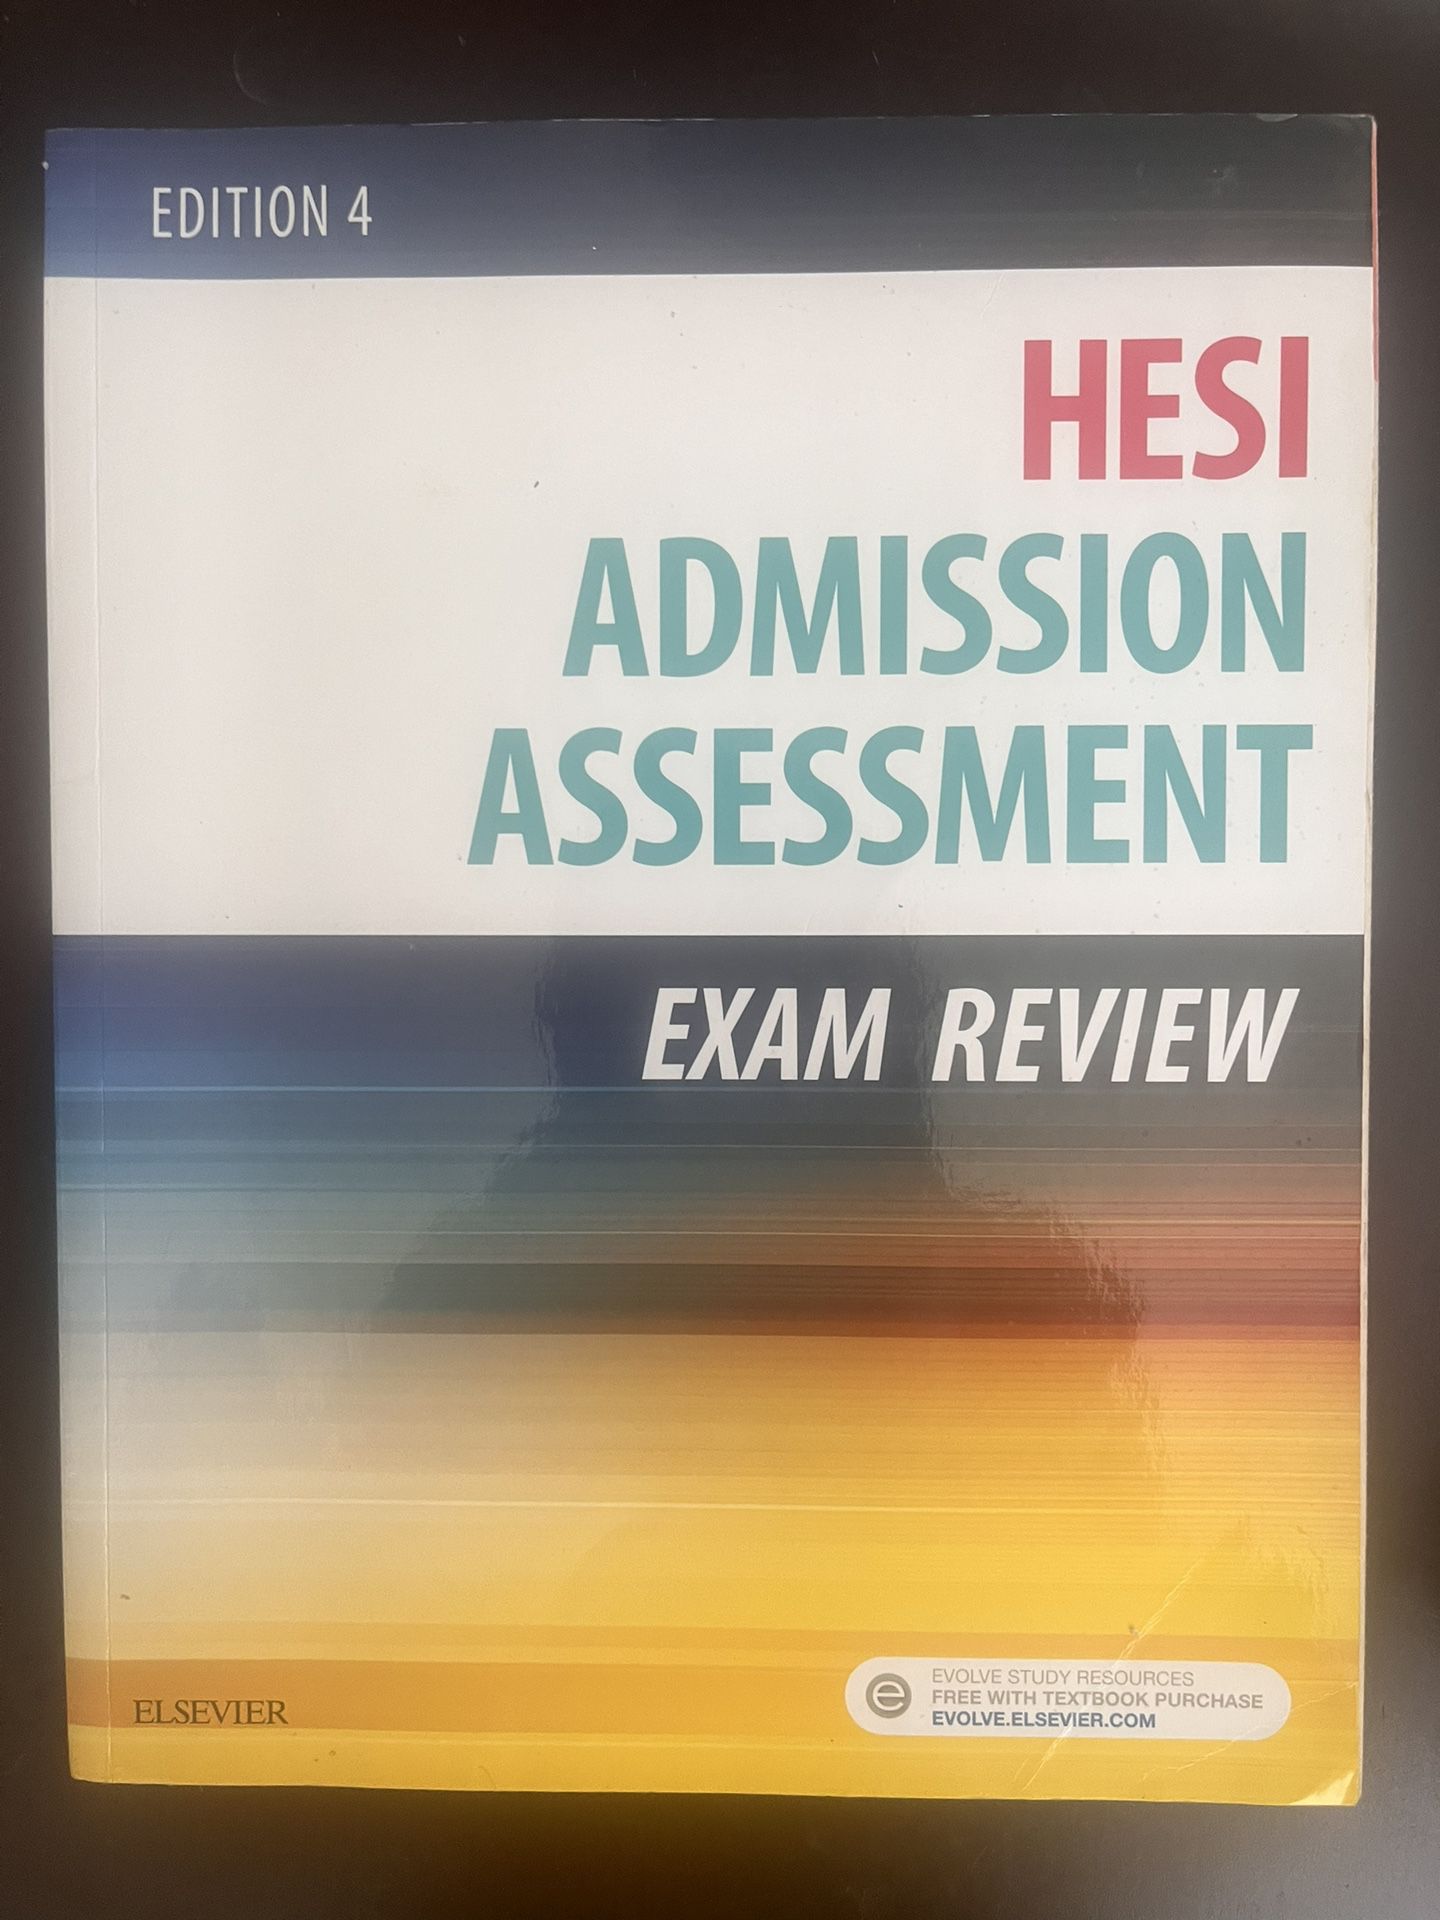 HESI Admission Assessment Exam Review 4th Edition ISBN-13: (contact info removed)353786